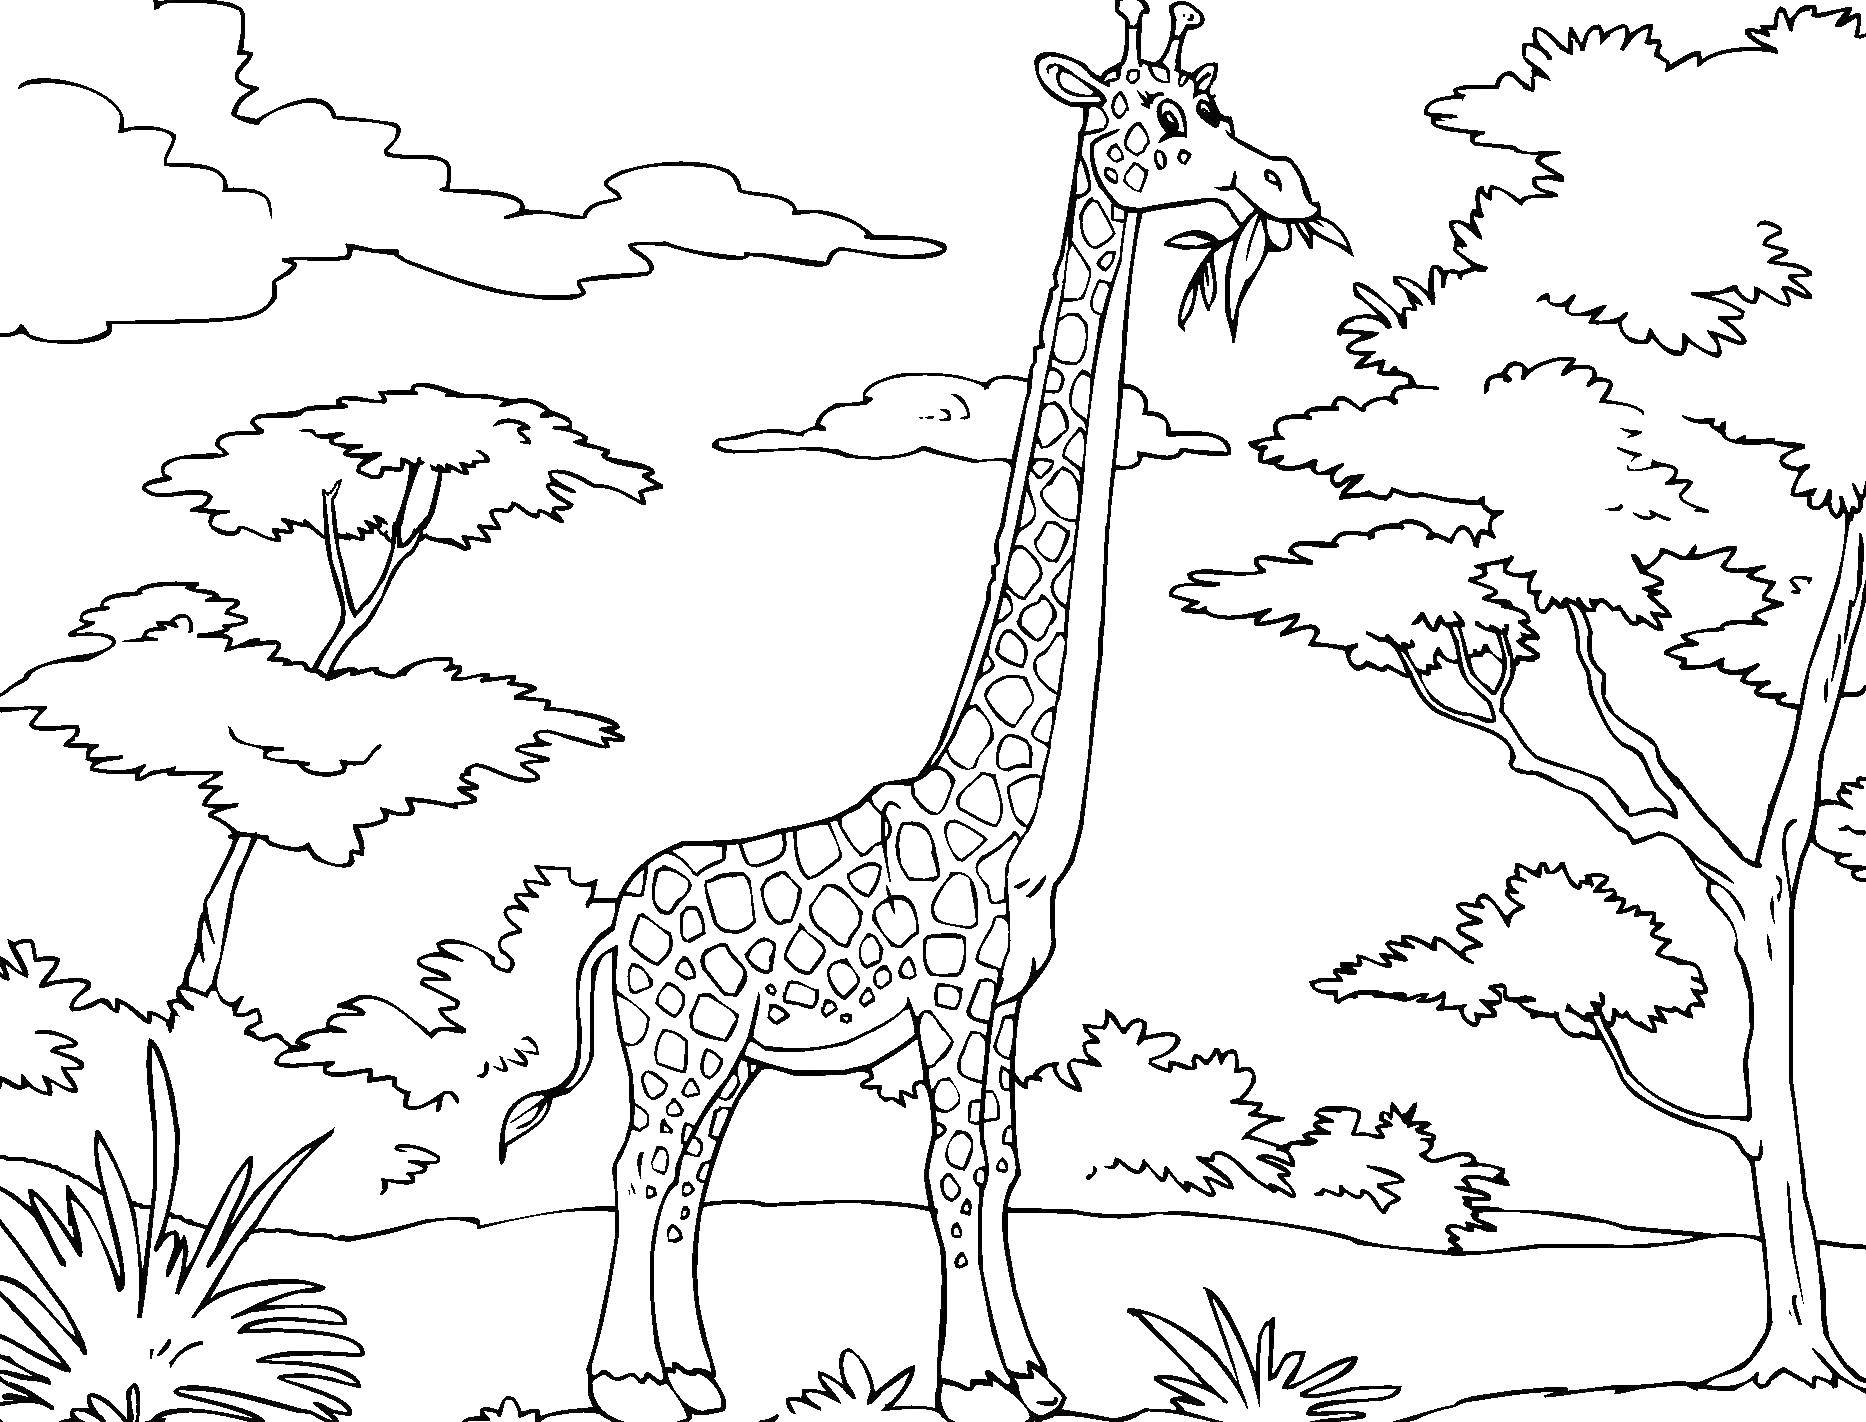 Coloring Giraffe eating leaves. Category Animals. Tags:  animals, giraffe.